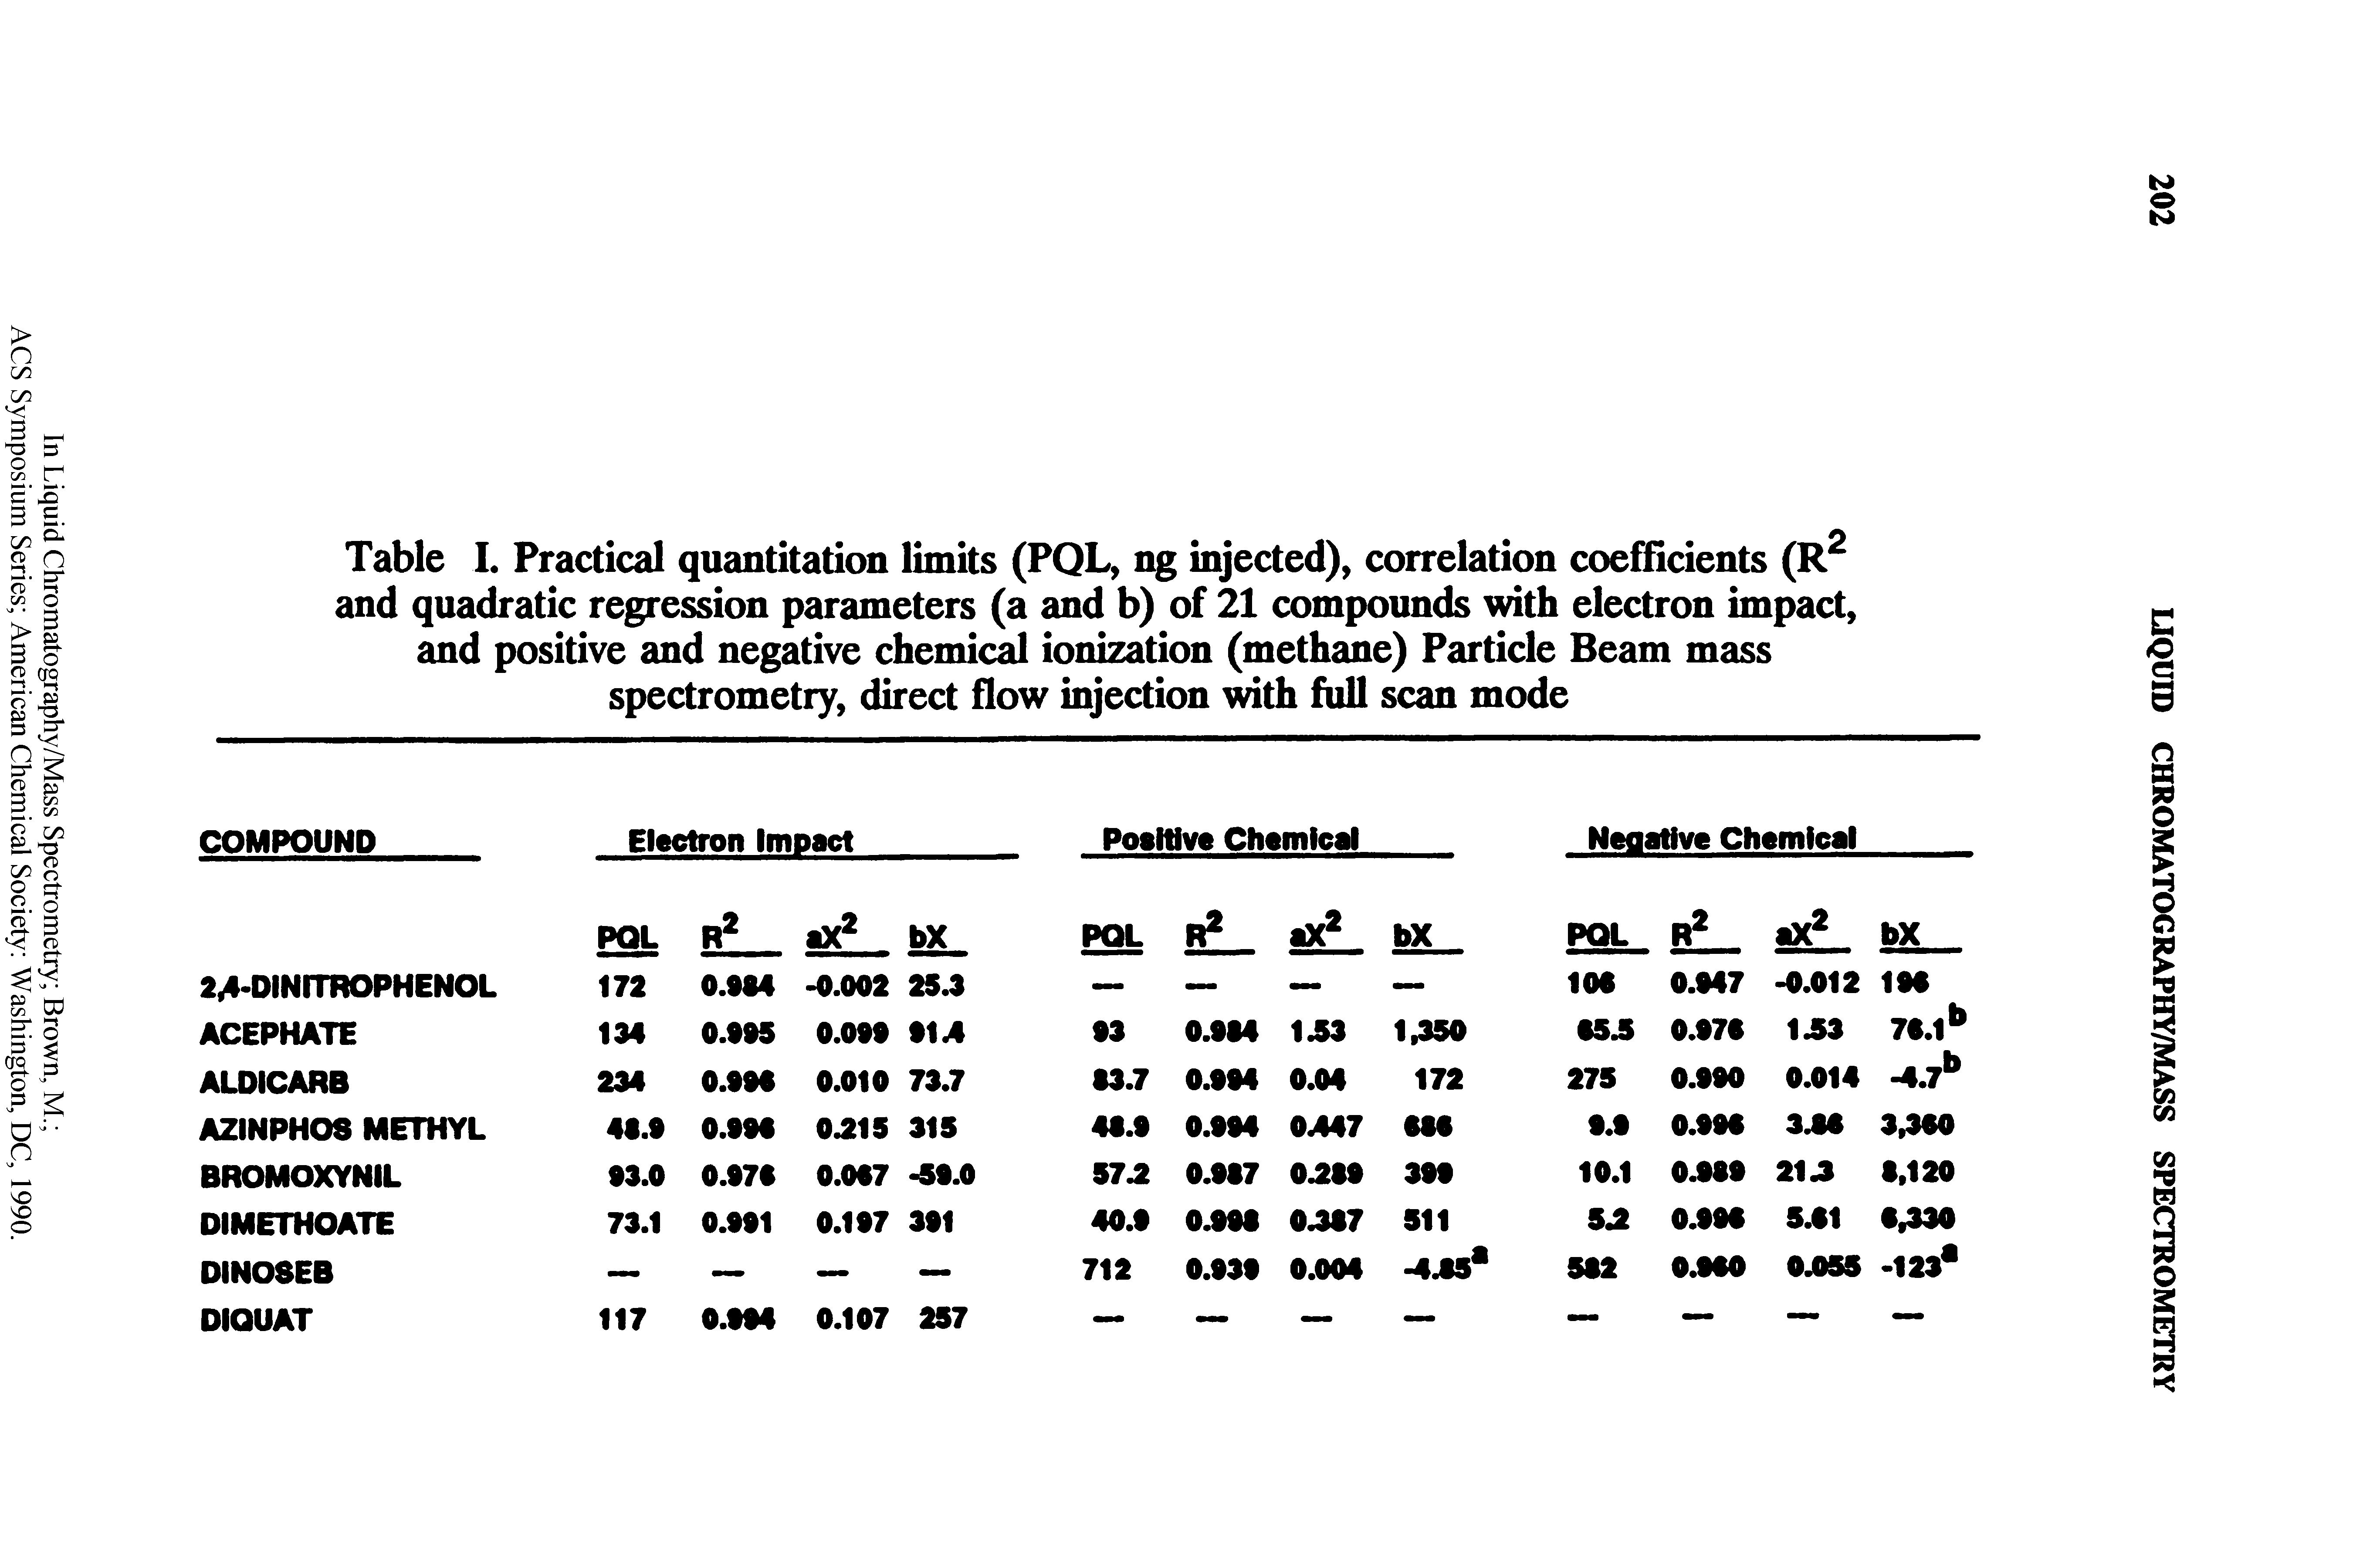 Table I. Practical quantitation limits (PQL, ng injected), correlation coefficients (R2 and quadratic regression parameters (a and b) of 21 compounds with electron impact, and positive and negative chemical ionization (methane) Particle Beam mass spectrometry, direct flow injection with full scan mode...